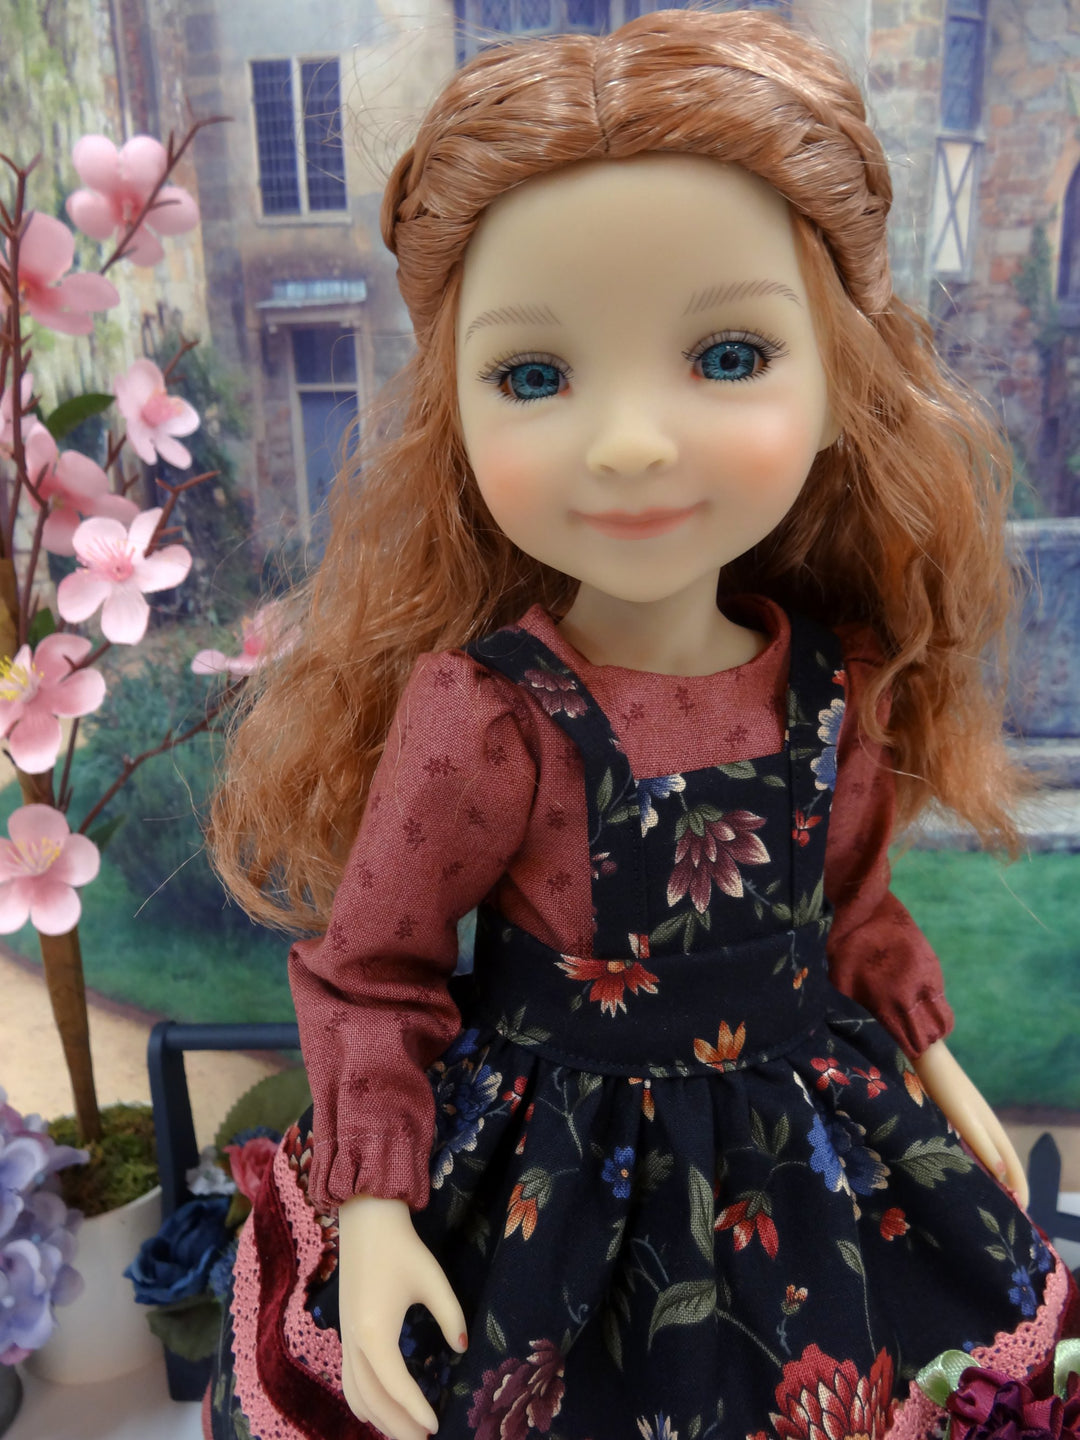 Avonlea Autumn - dress & apron for Ruby Red Fashion Friends doll